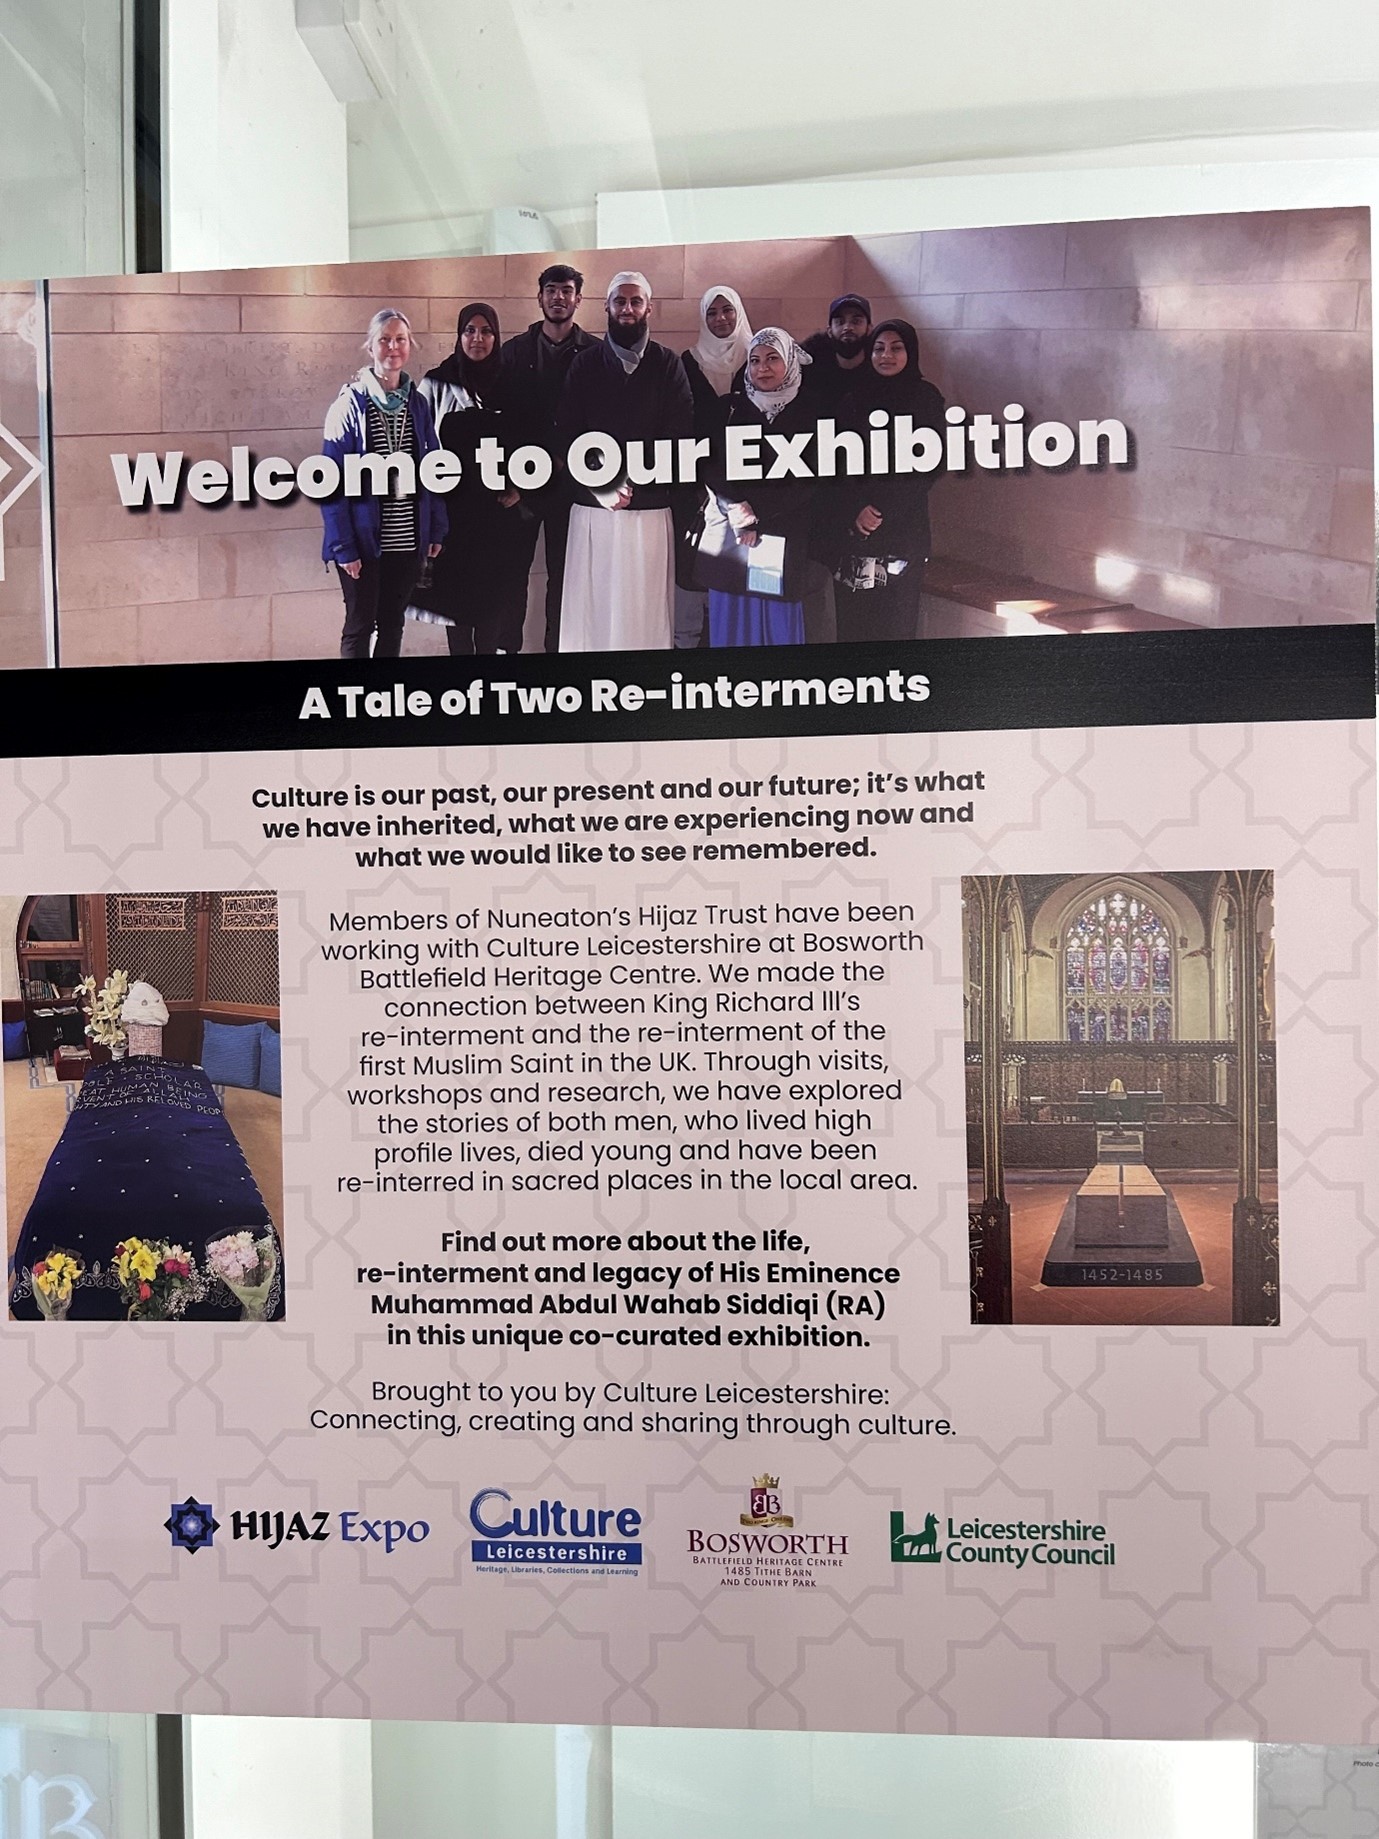 Poster for the exhibition titled A Tale of Two Re-interments. It includes text from the Hijaz Trust about an exhibition in Leicestershire connecting the re-interments of King Richard III and Muhammad Abdul Wahab Siddiqi, the first Muslim saint in the UK.